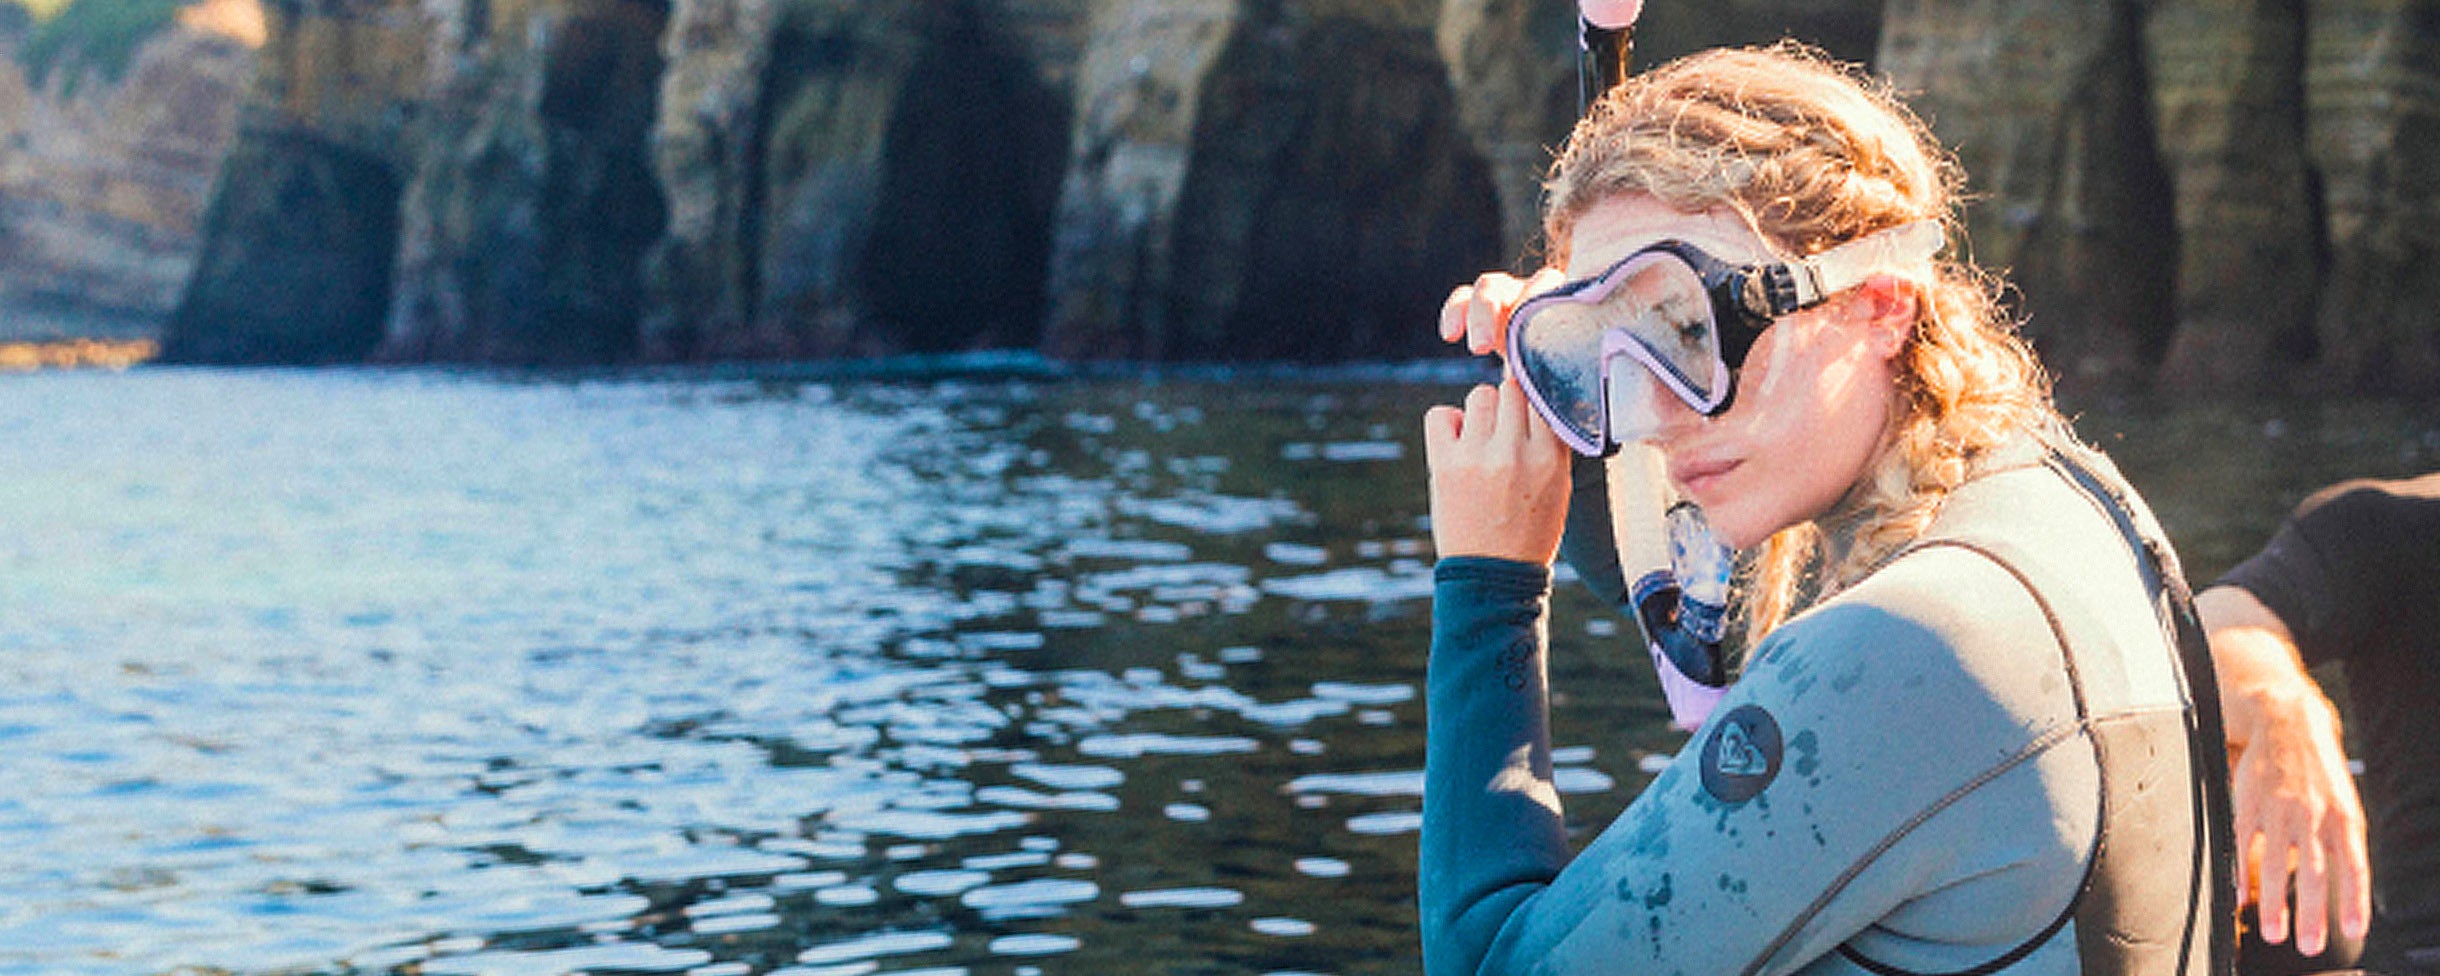 Snorkeler on a snorkeling tour with Everyday California about to jump into the water in front of the Sea Caves in San Diego.